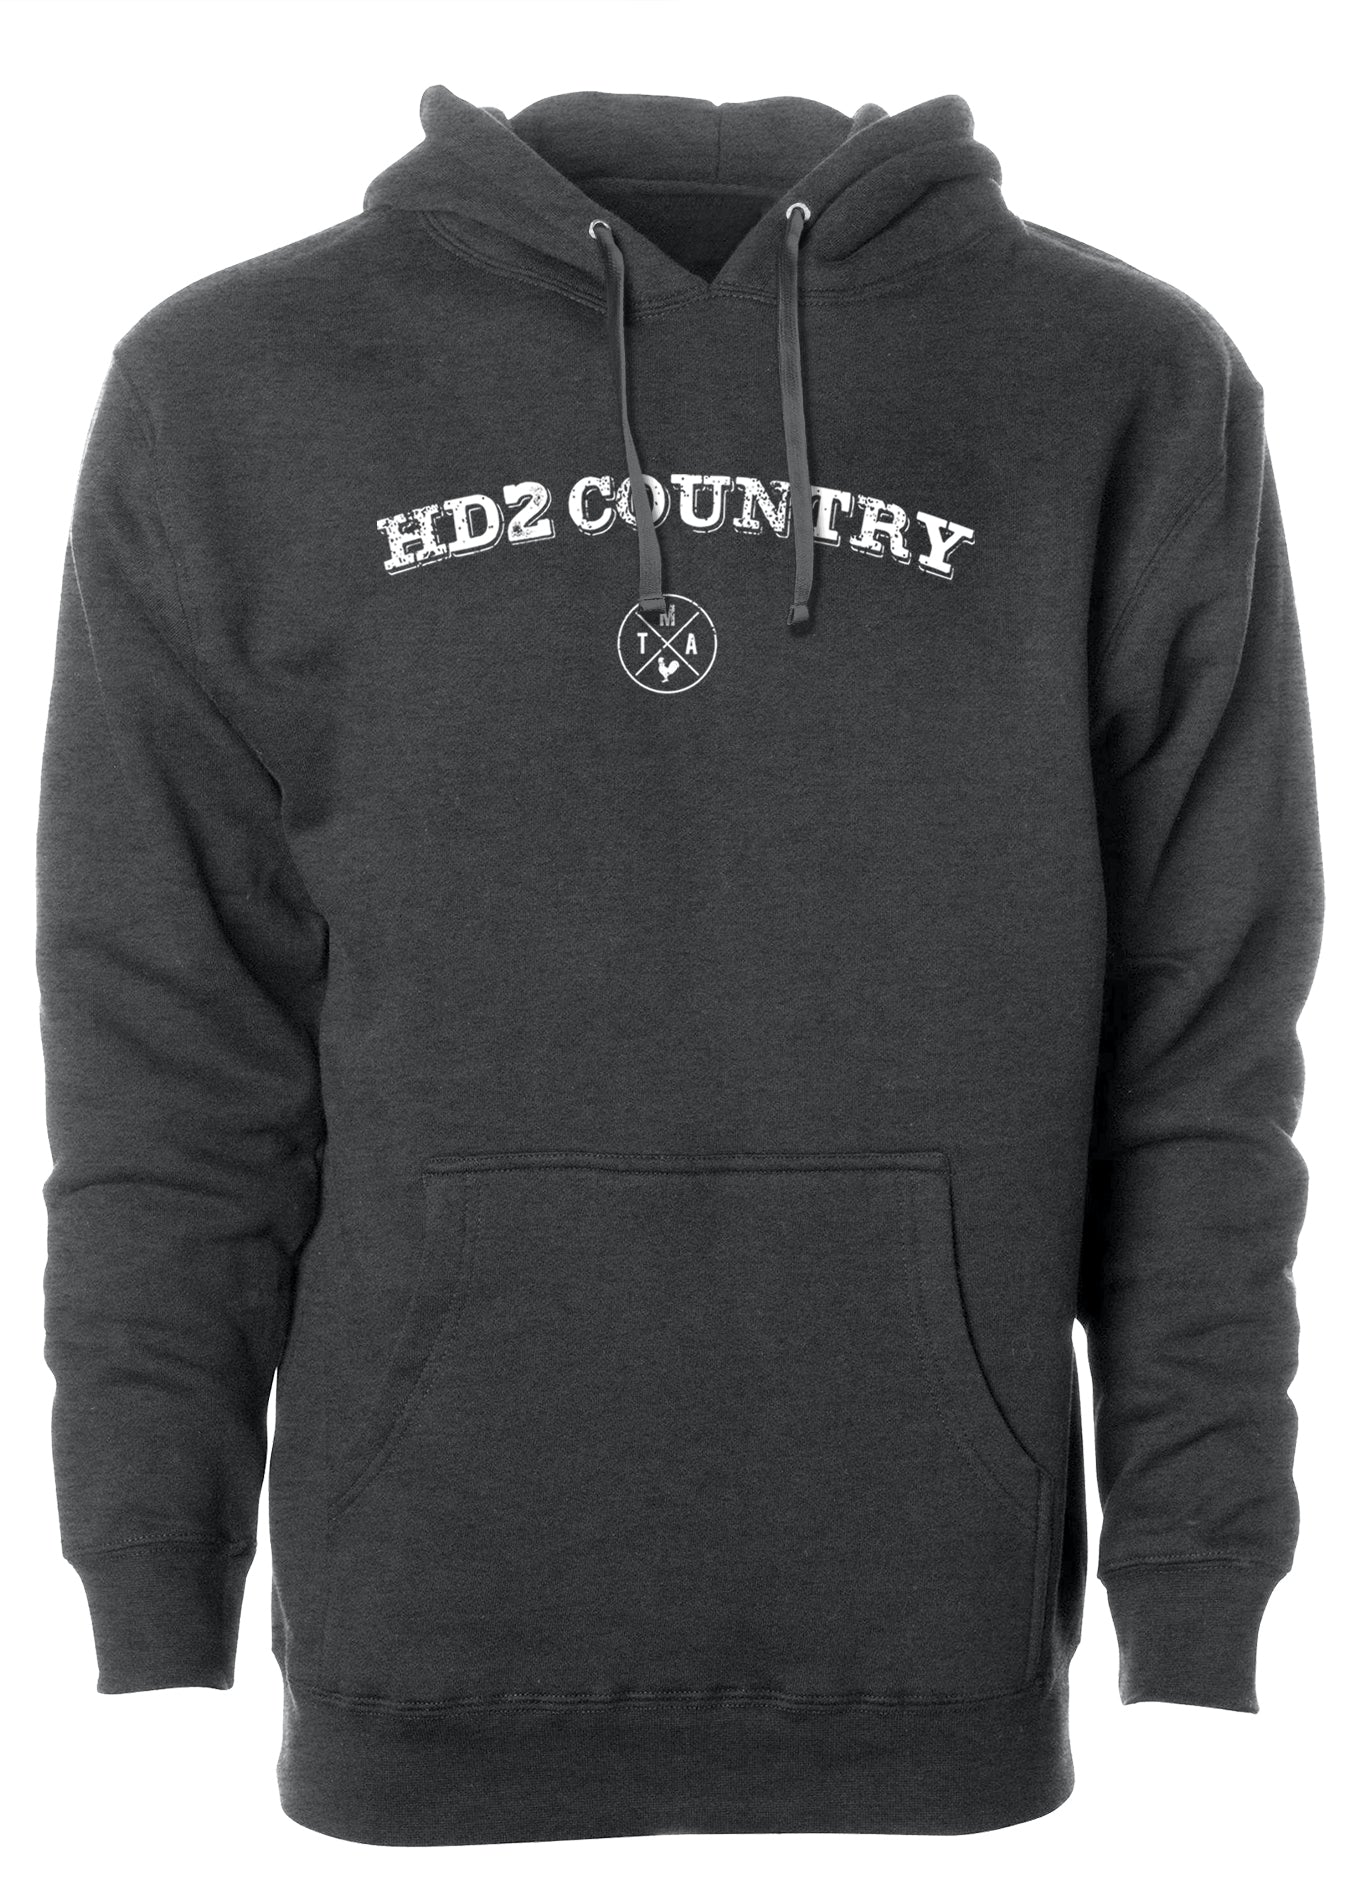 TMA STL Saint Louis St. The Morning After Hoodie HD2 Country Green